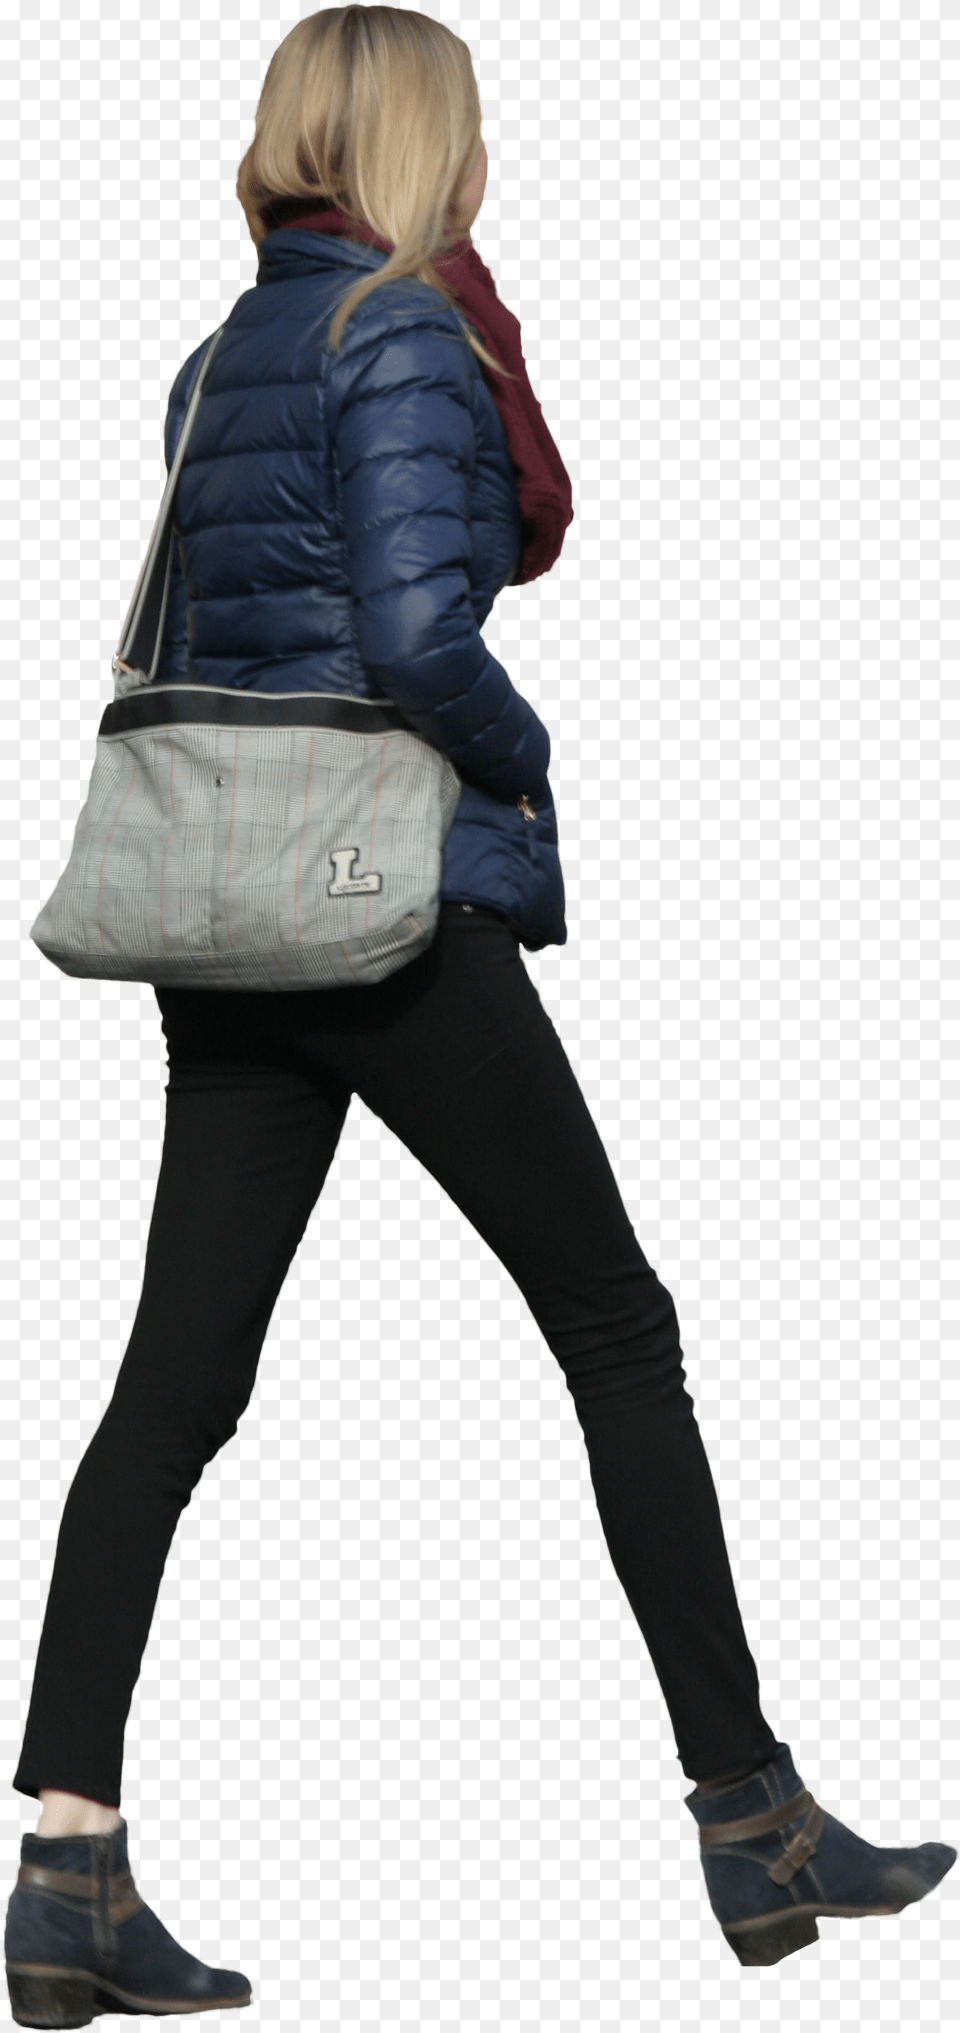 People Walking Transparent U0026 Clipart Free Download Ywd Cut Out People Walking, Accessories, Purse, Jacket, Handbag Png